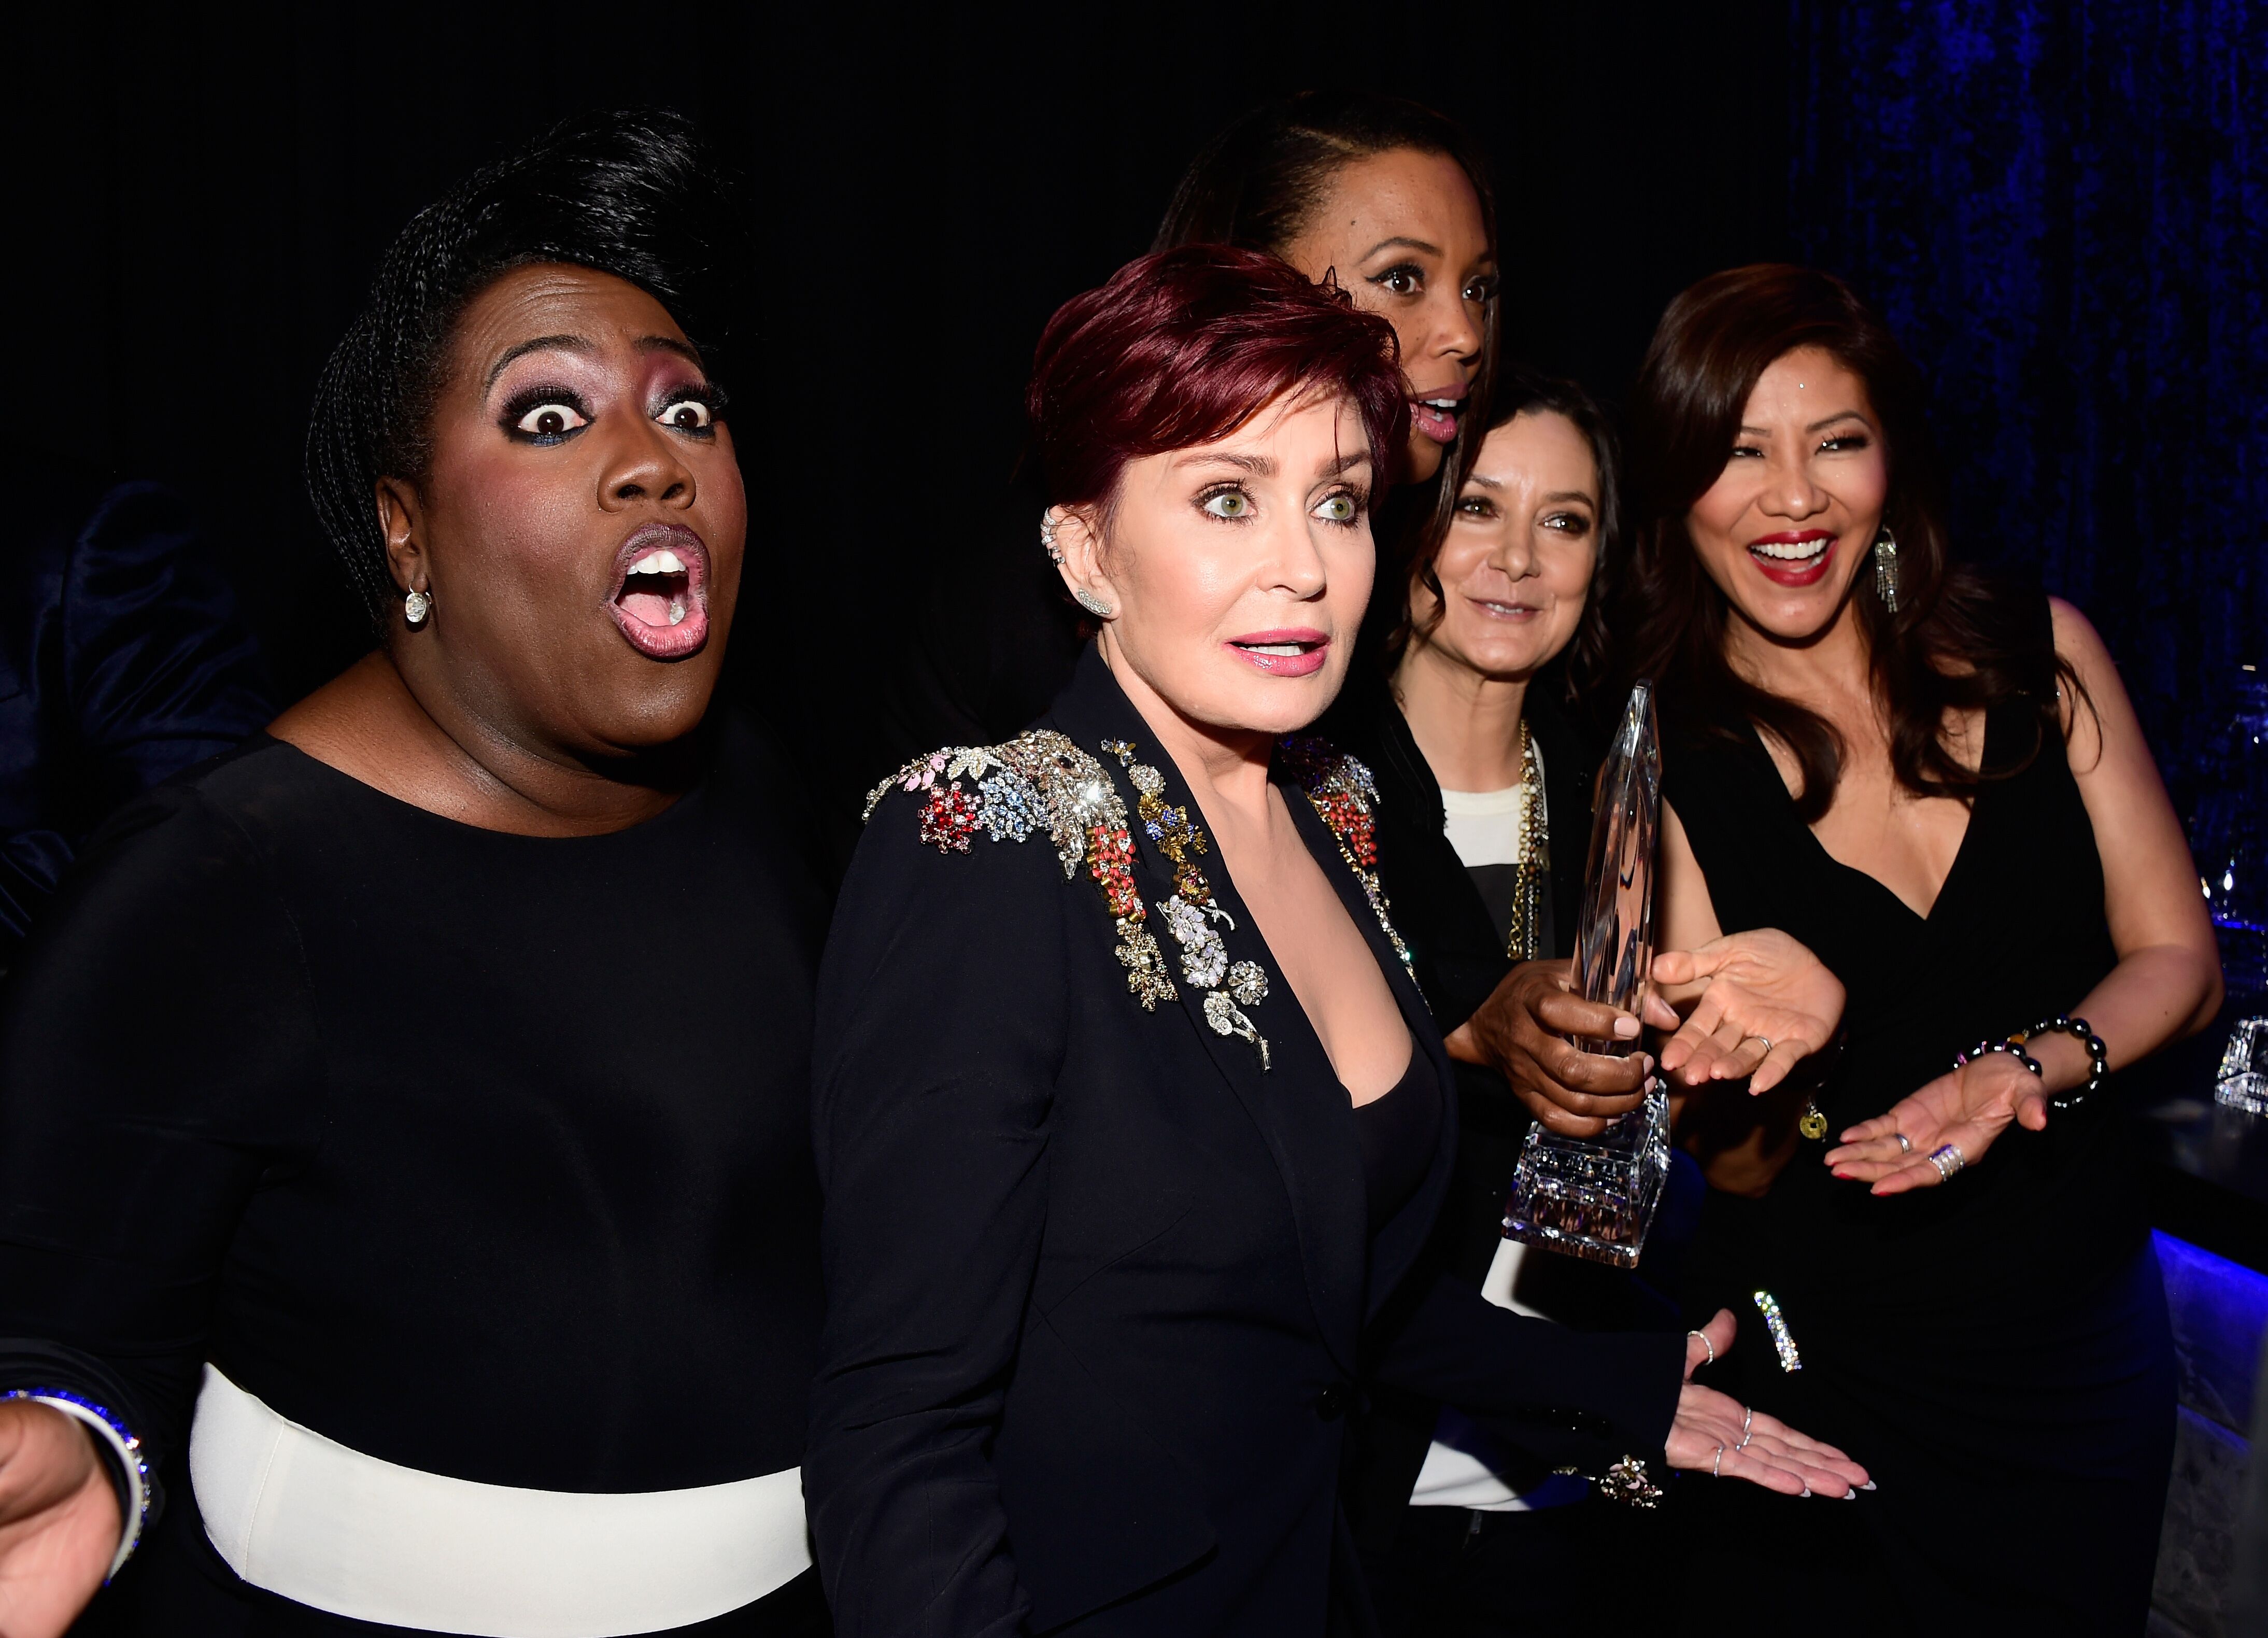 Sheryl Underwood, Sharon Osbourne, Aisha Tyler, Sara Gilbert and Julie Chen with the award for Favorite Daytime TV Hosting Team at the People's Choice Awards 2016 | Source: Getty Images